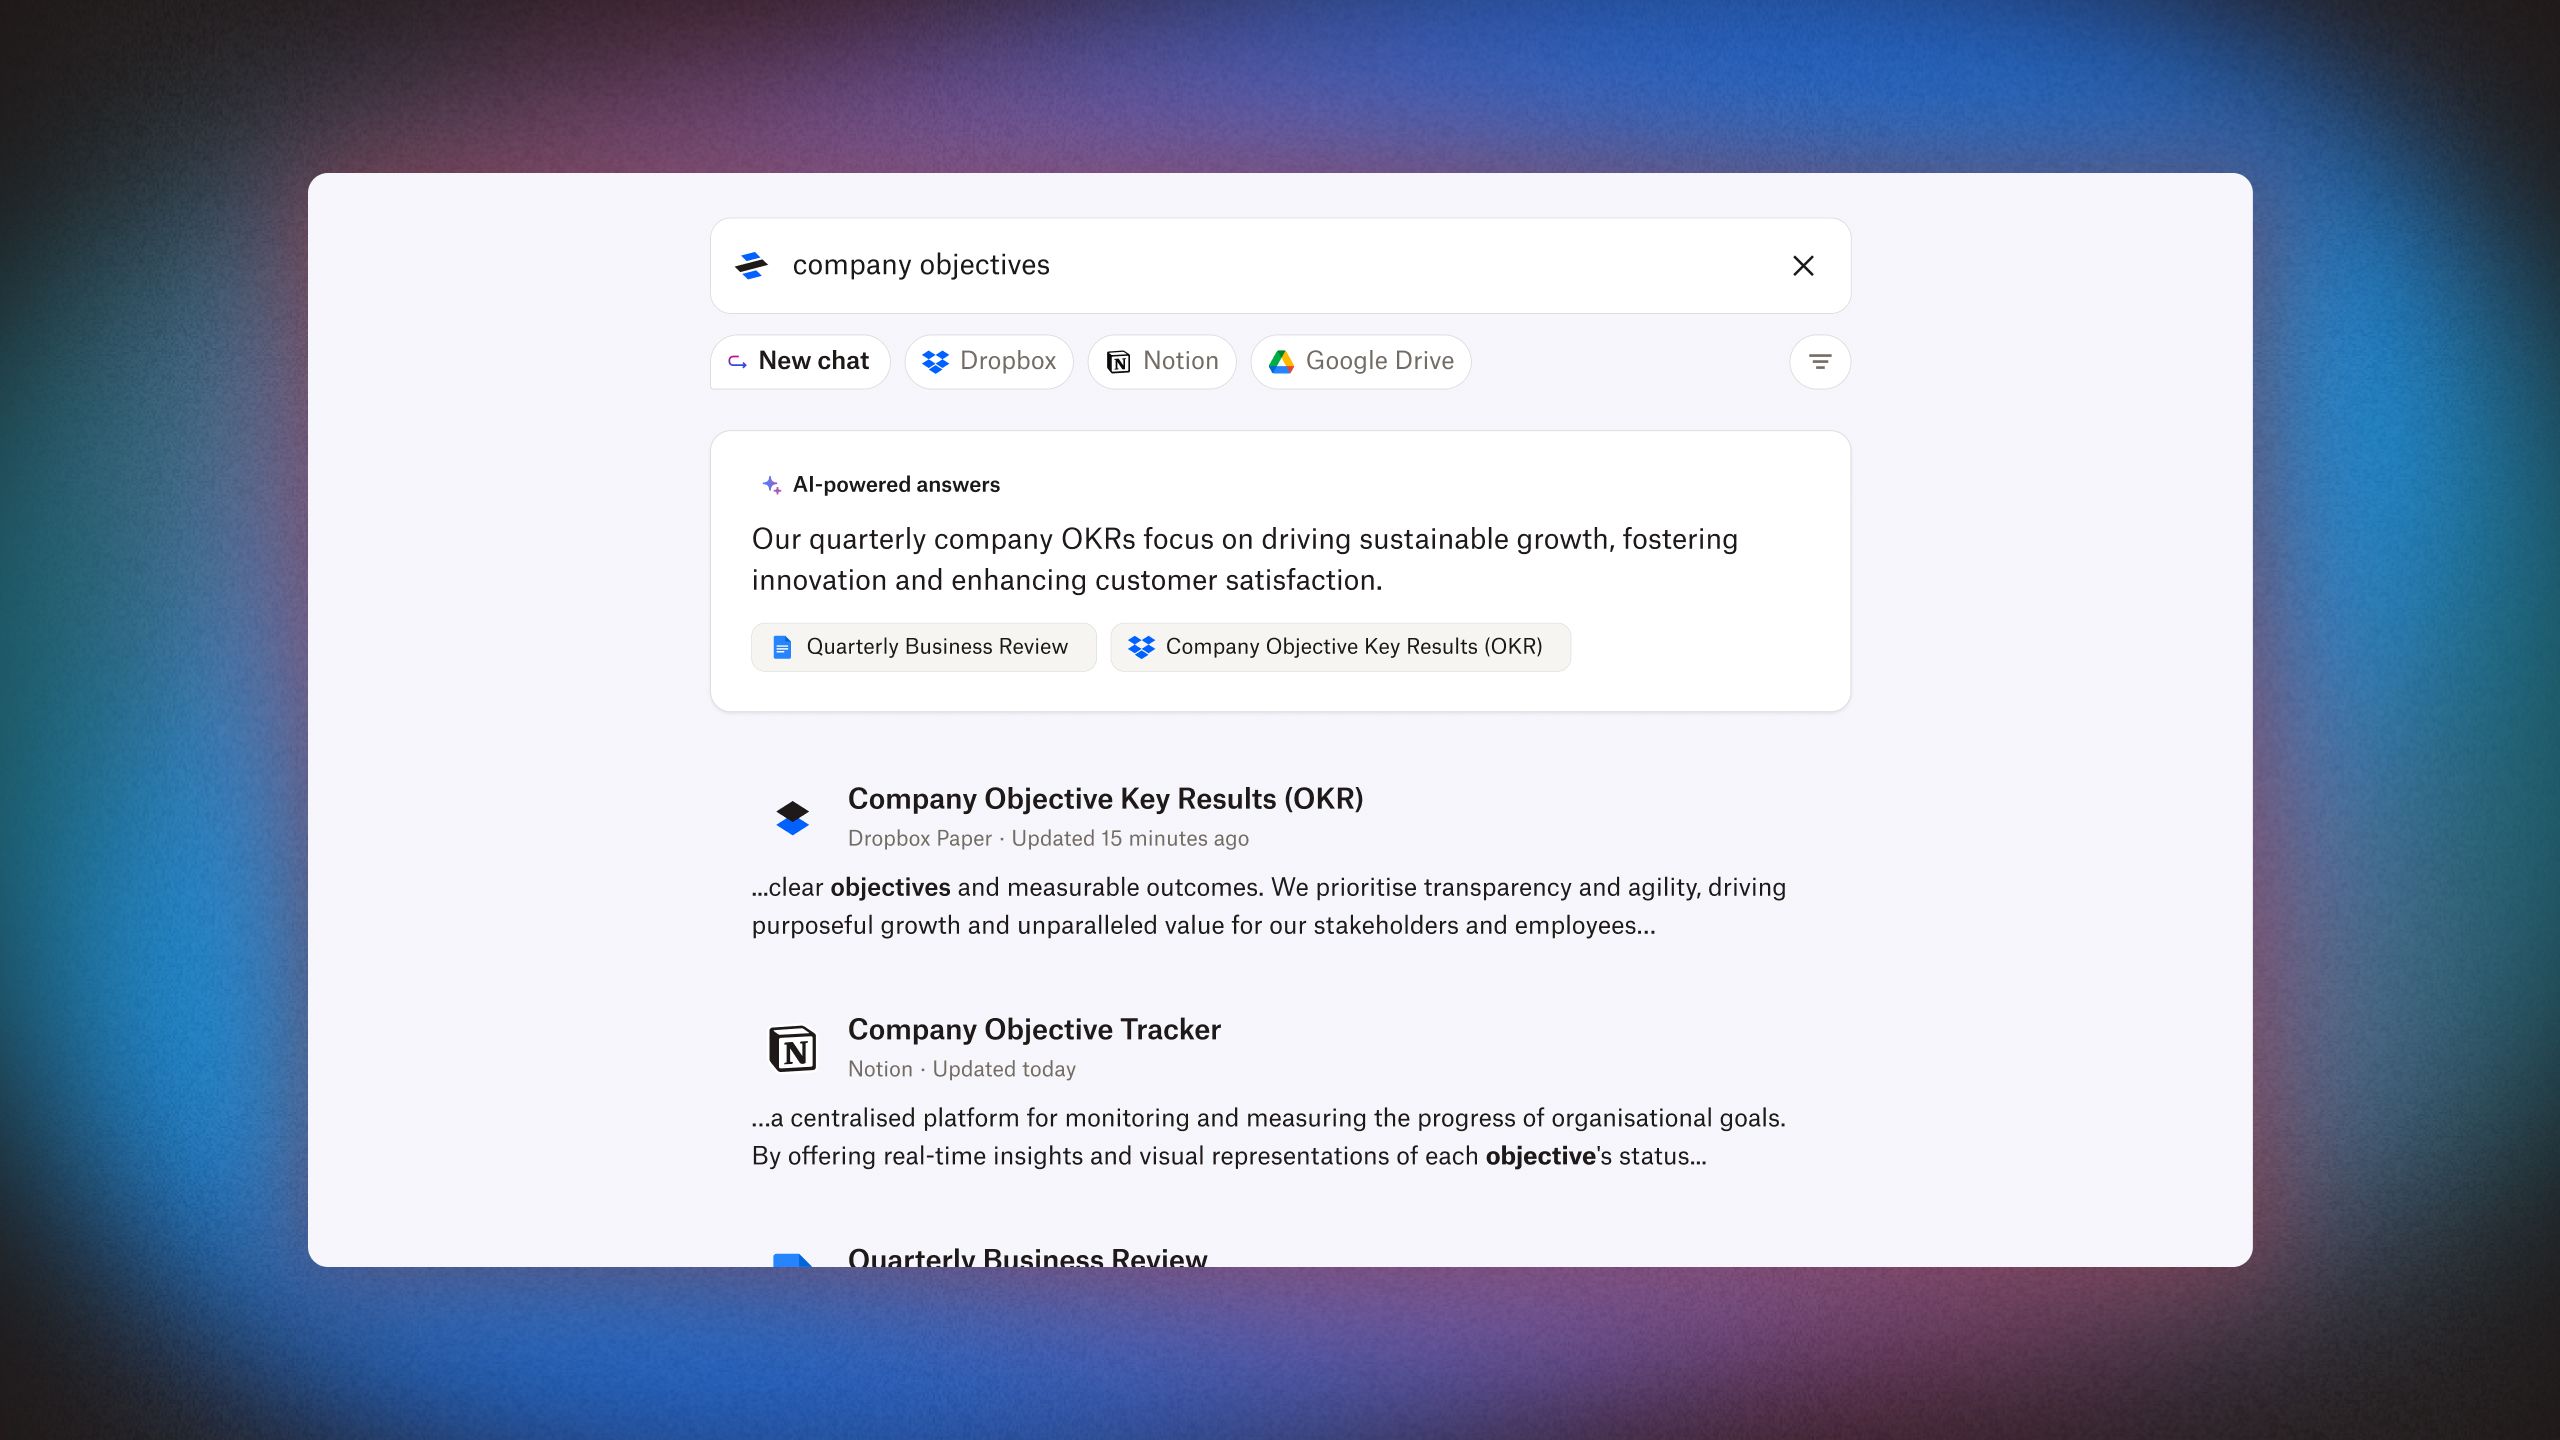 Image animation shows user typing ‘company objectives’ into the Dash search bar, viewing content with the featured keywords and then clicking on a Dropbox Paper file titled Company Objective Key Results (OKR).